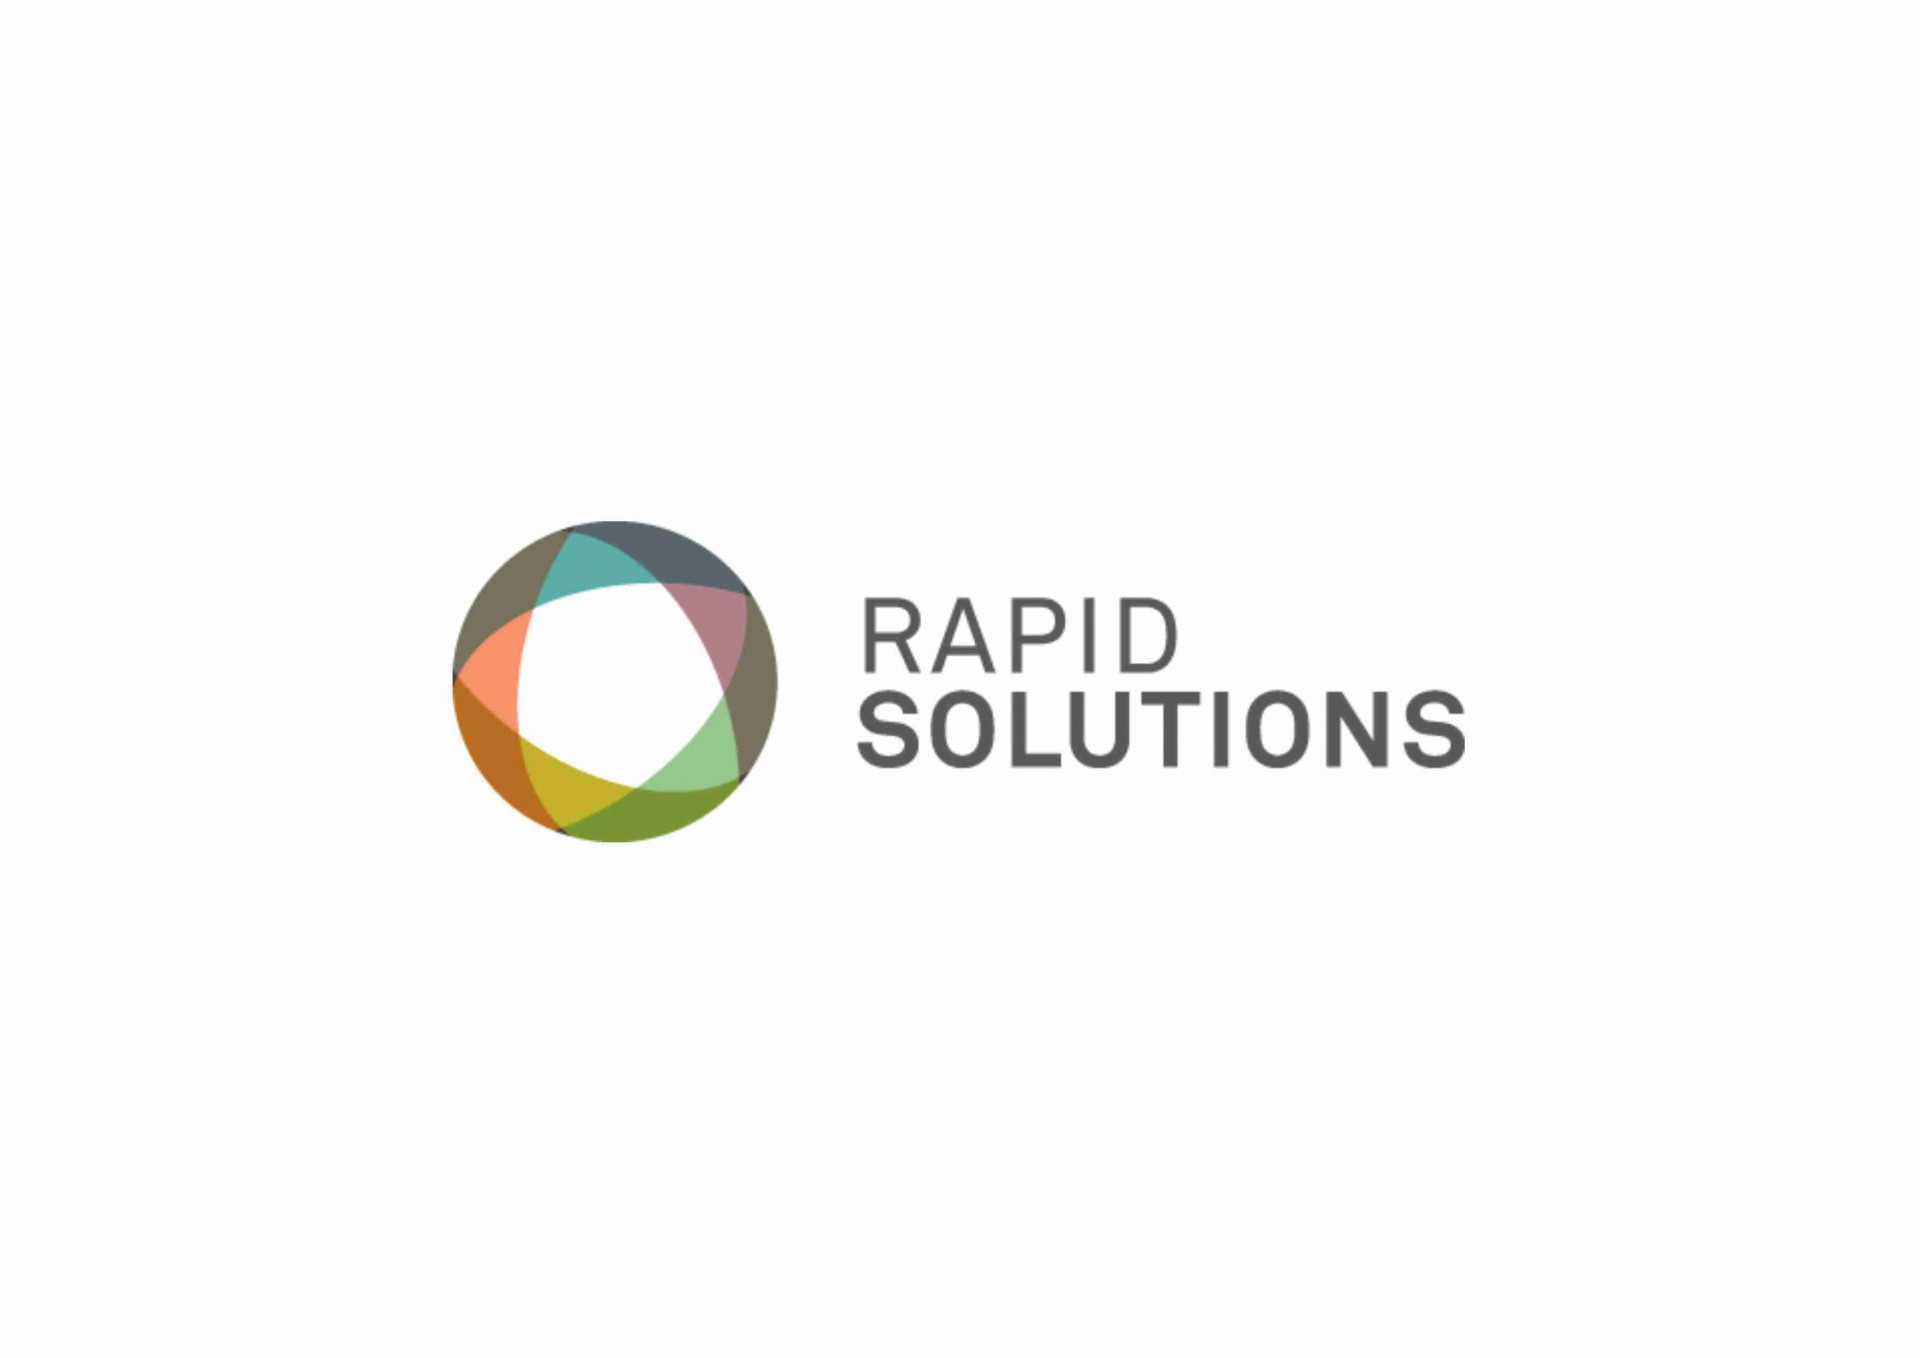 Our Partnership with "Rapid Solutions"!